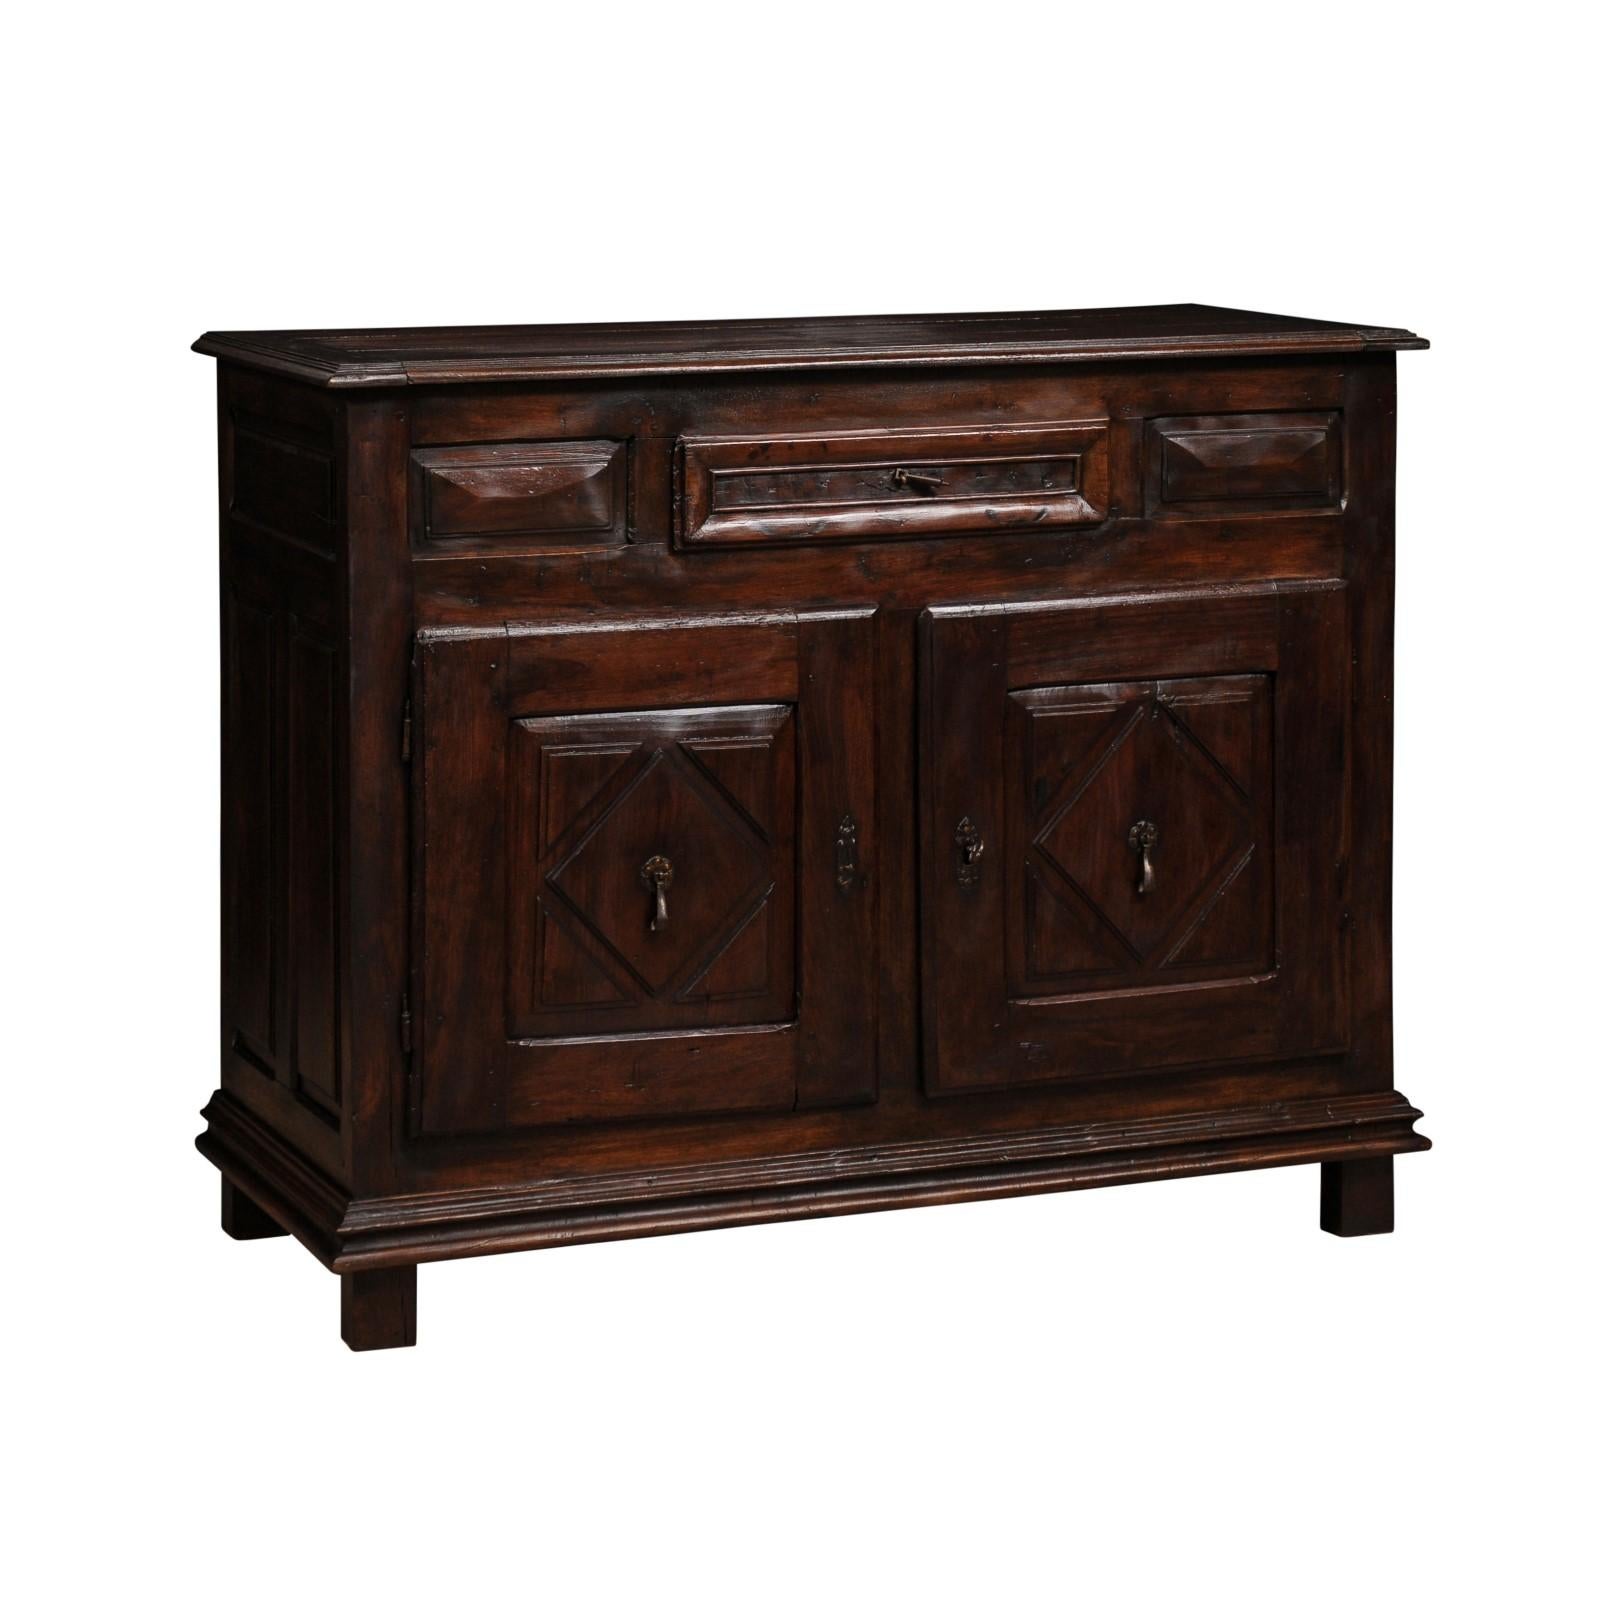 A French Louis XIII style walnut buffet from the 19th century with two doors, single drawer and carved diamond motifs. Showcasing the elegance of French design, this Louis XIII style walnut buffet, dating from the 19th century, gracefully captures